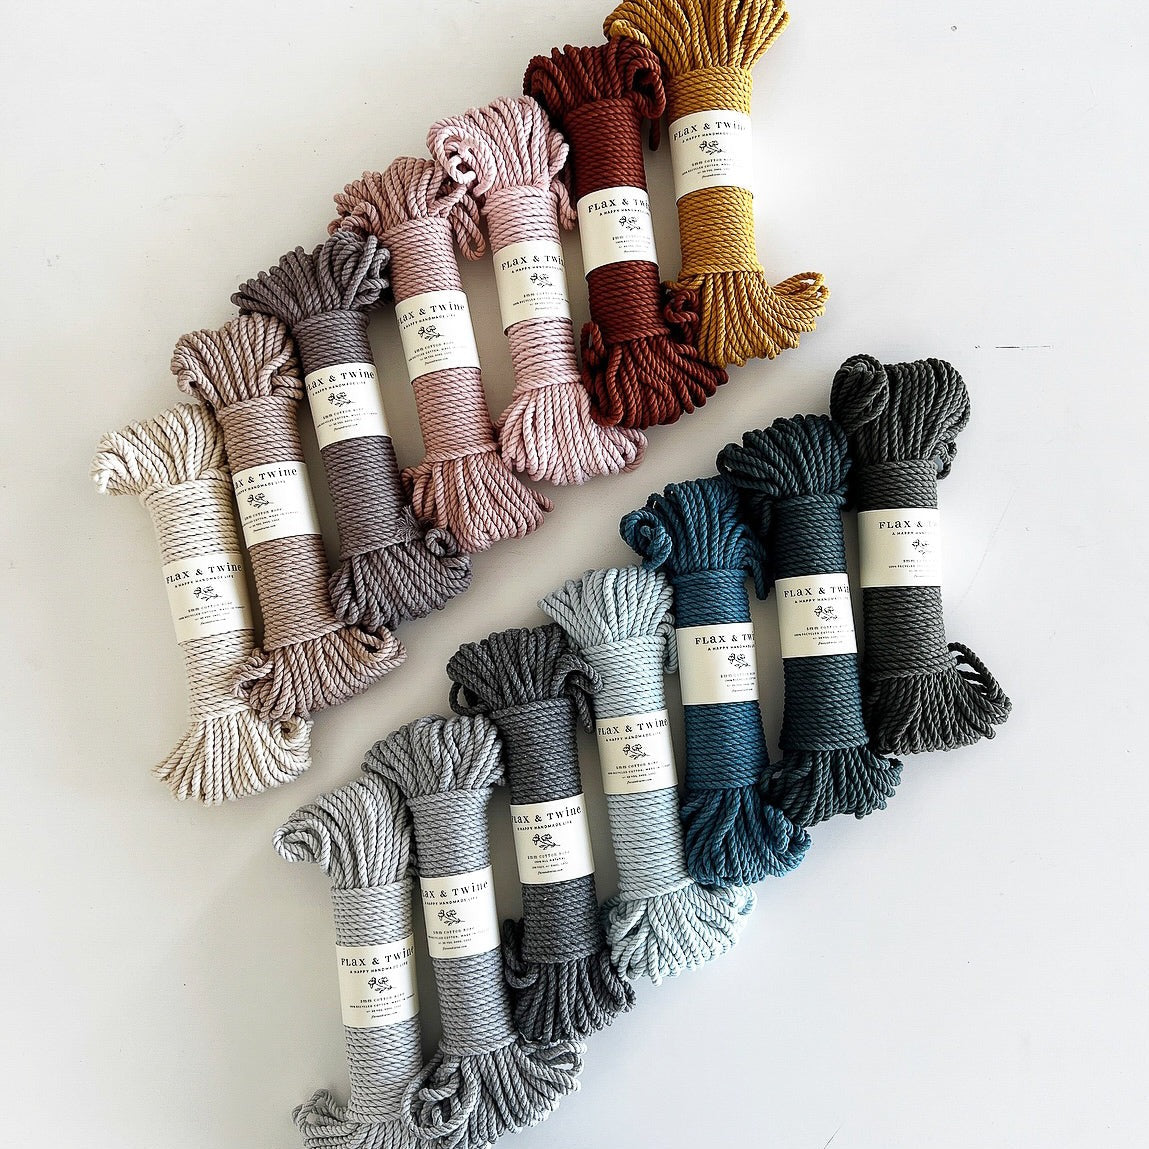 Flax & Twine Giant Cotton Squish Yarn - The Websters